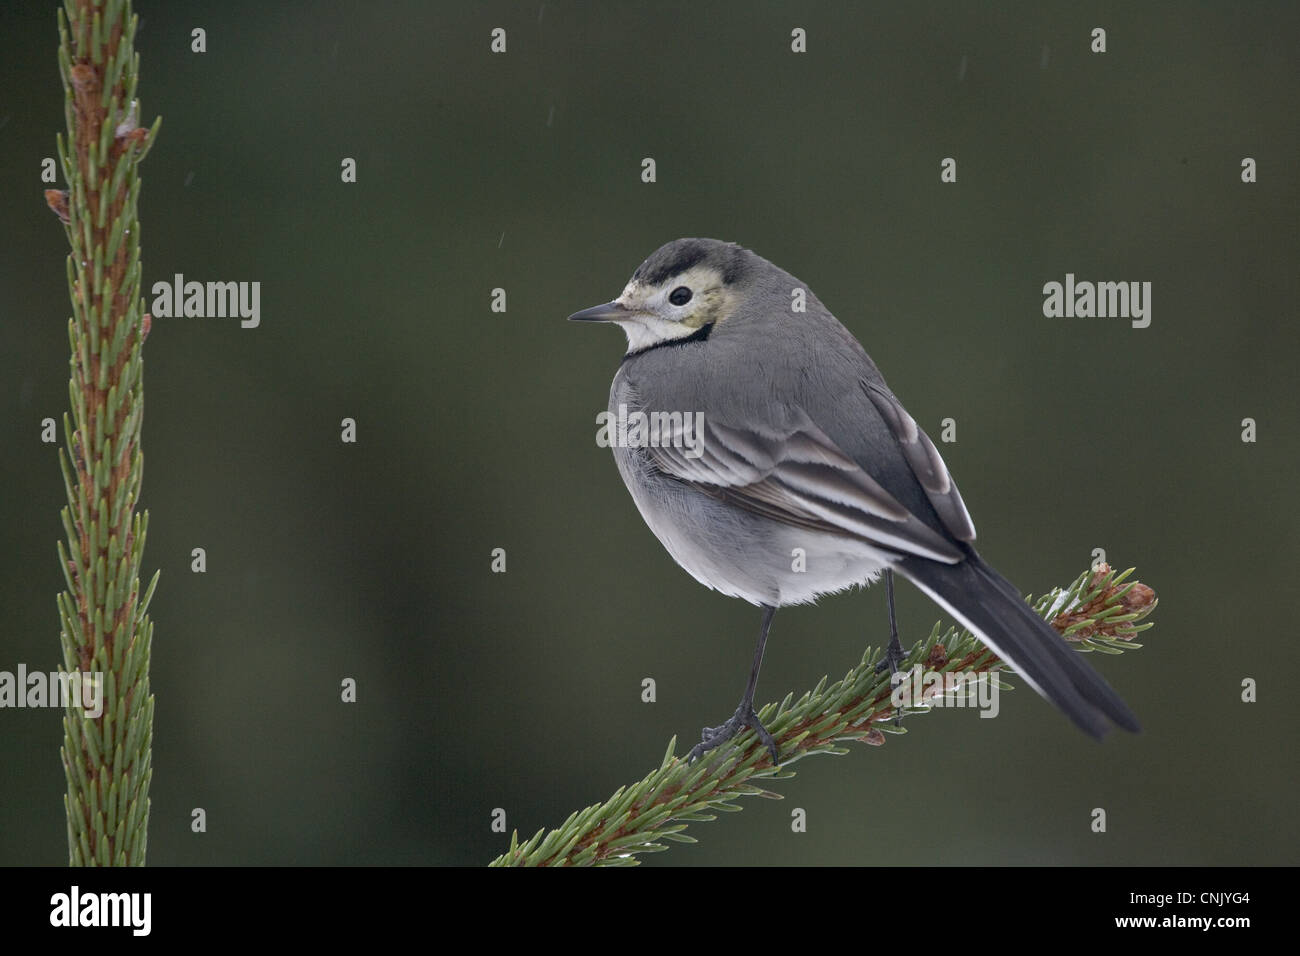 Pied Wagtail Motacilla alba yarrellii adult female perched Norway Spruce Picea abies planted Christmas tree snowfall Bentley Stock Photo